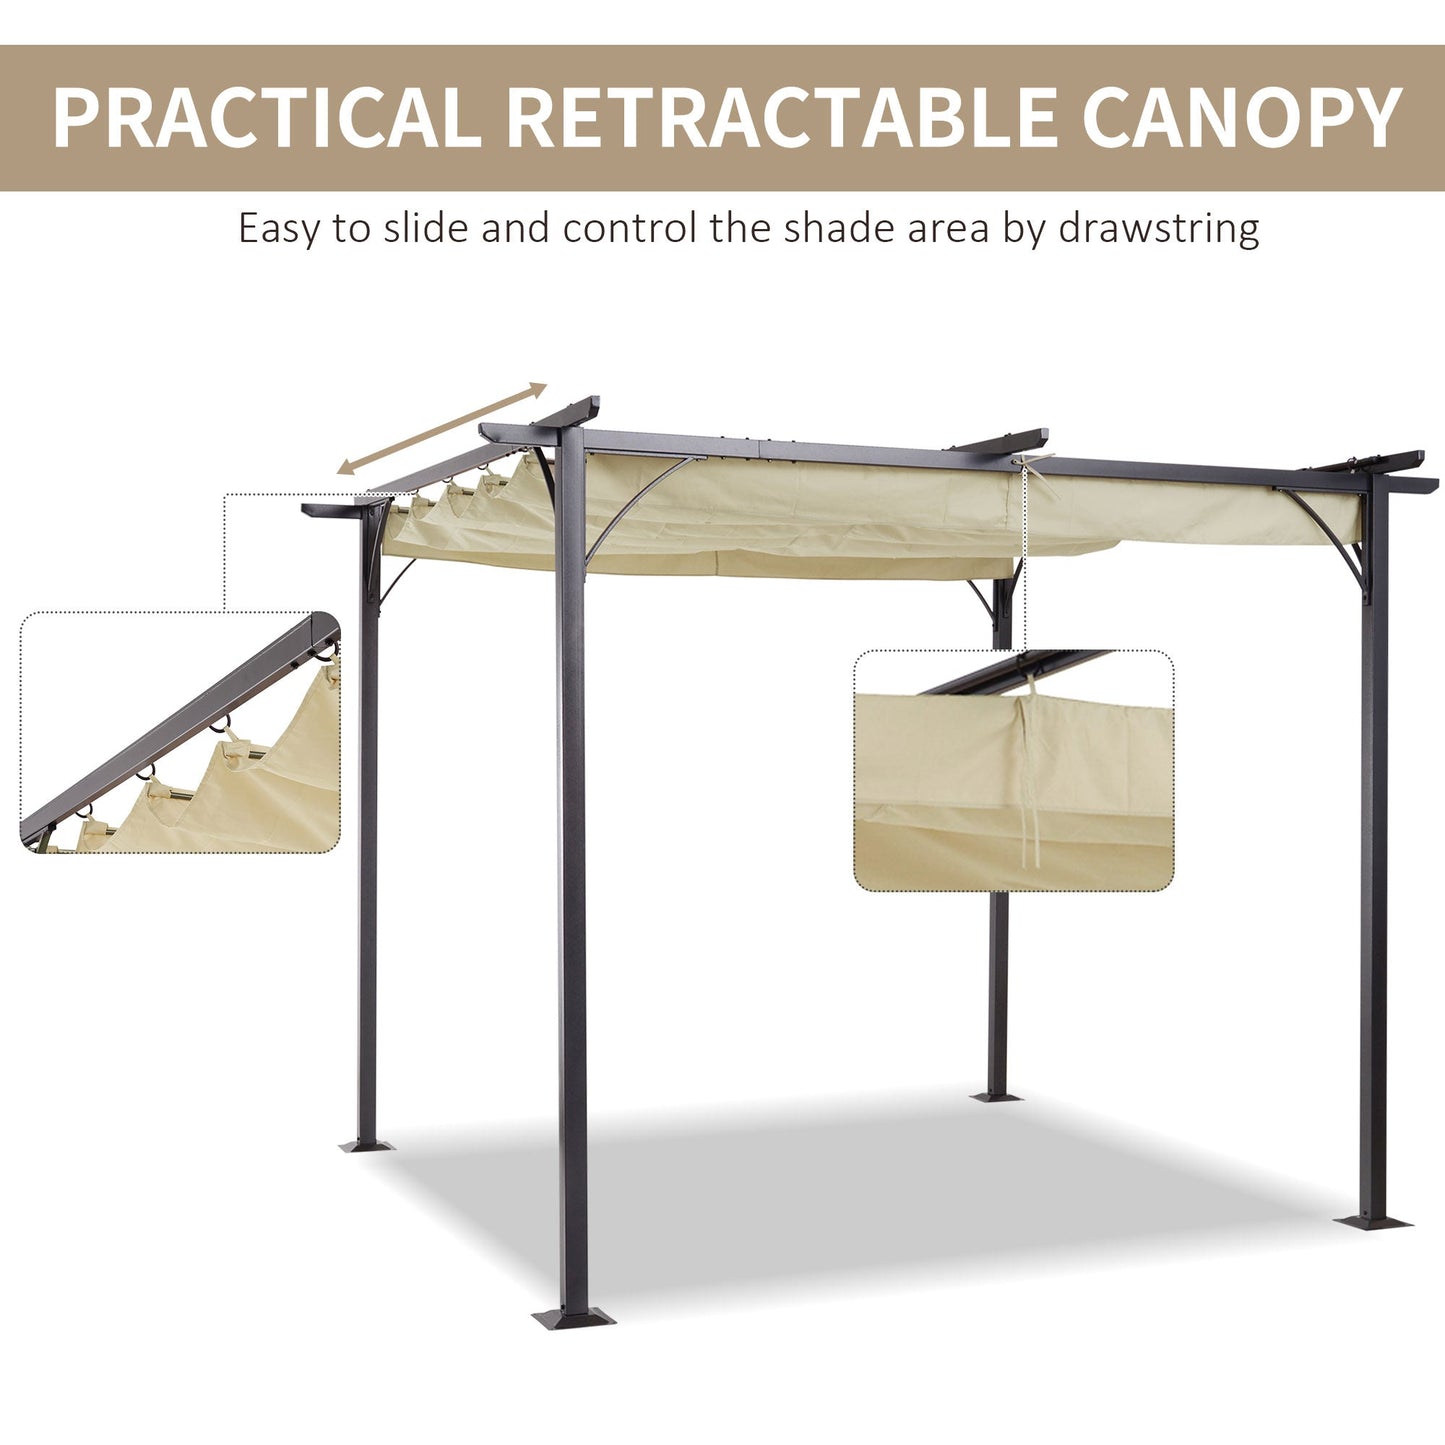 Outdoor and Garden-10' x 10' Retractable Patio Gazebo Pergola with UV Resistant Outdoor Canopy & Strong Steel Frame Beige - Outdoor Style Company